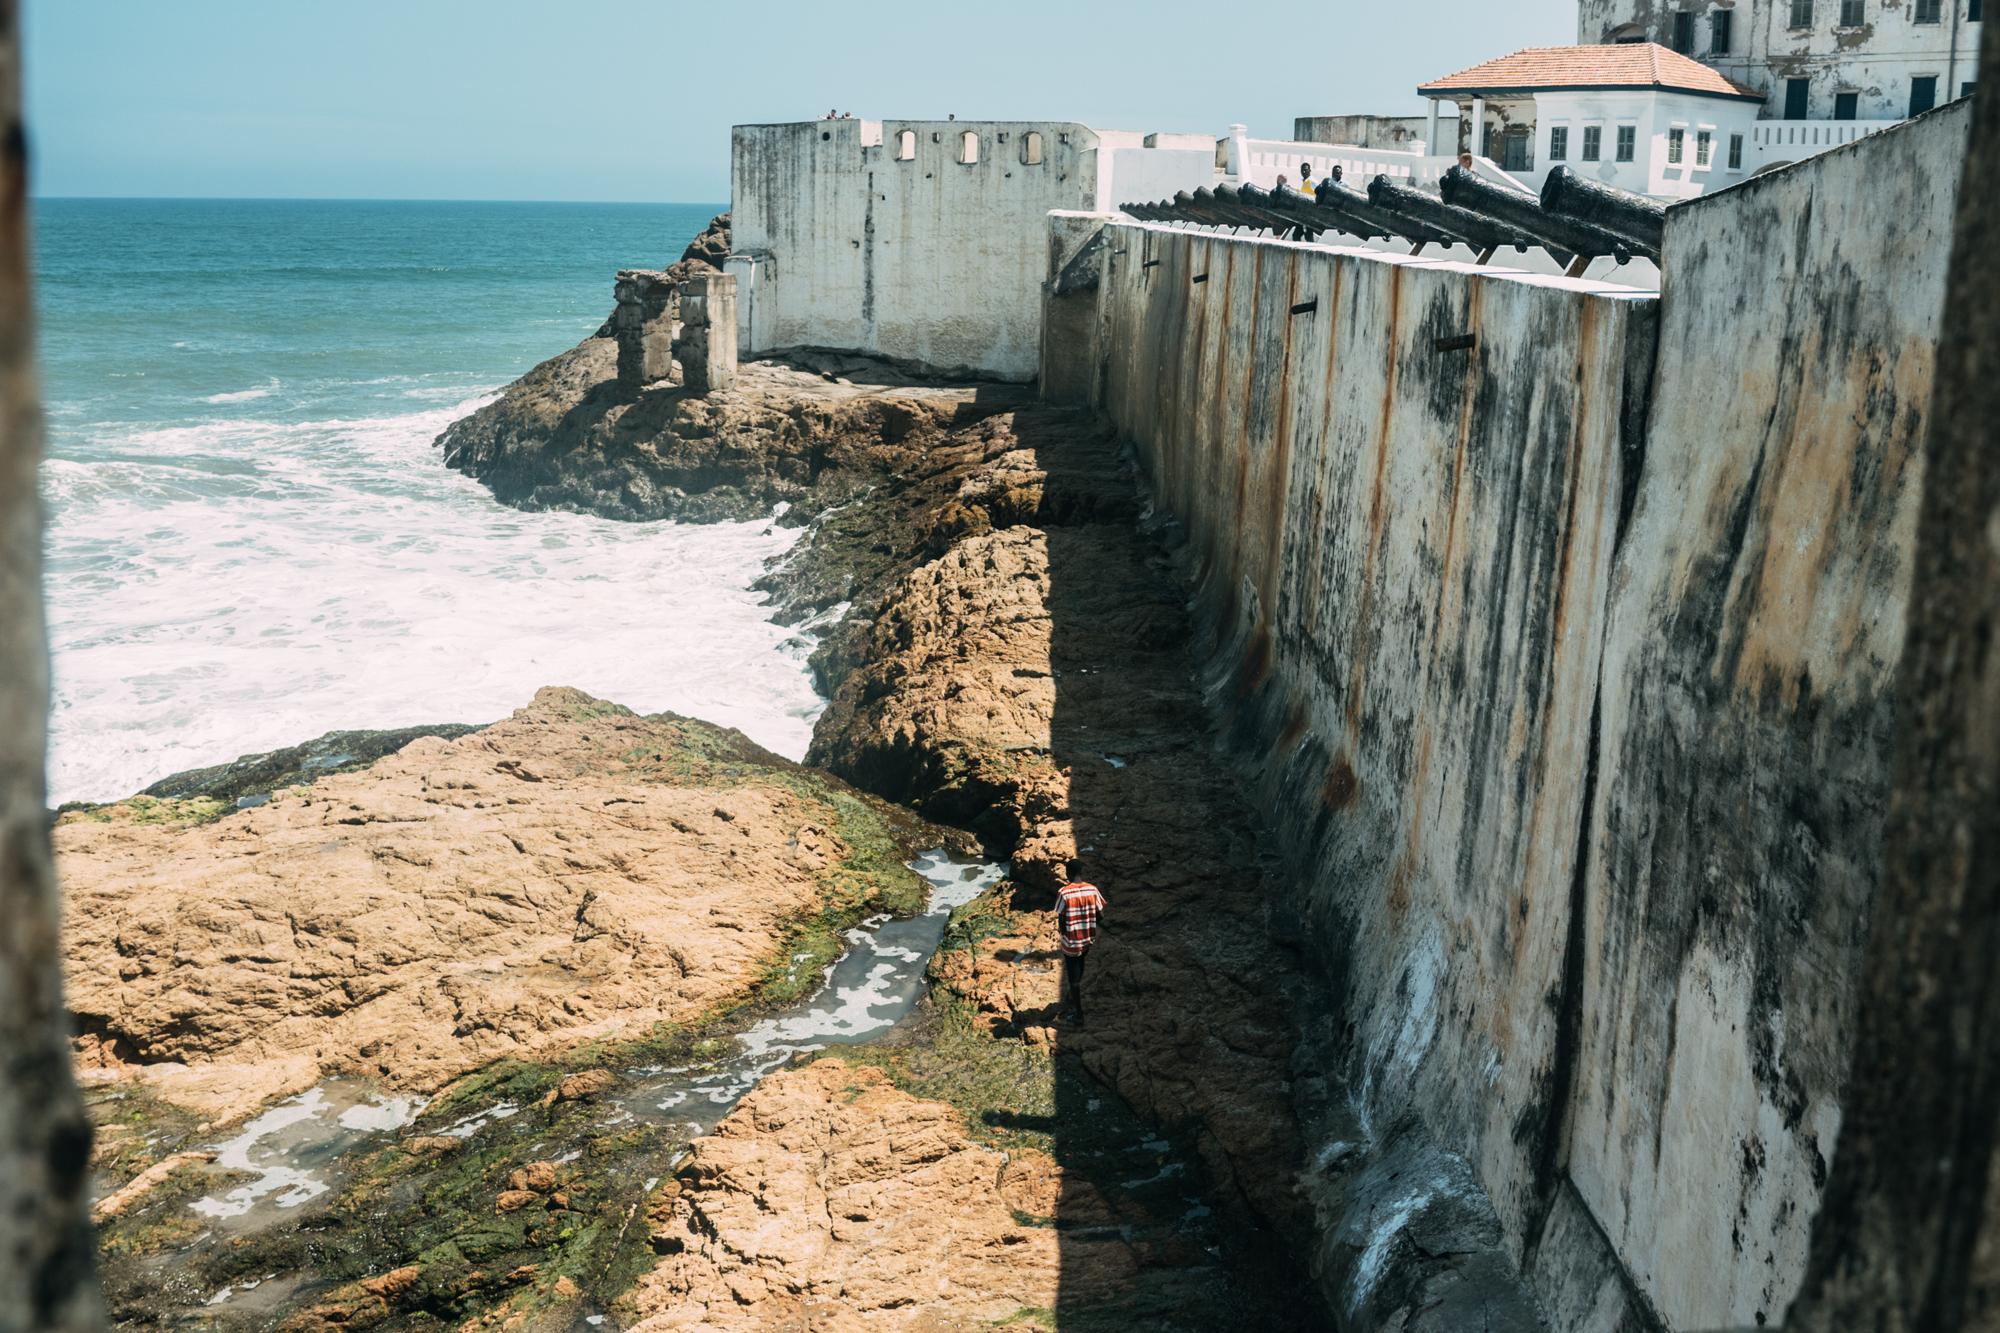 The Year of Return - A man walks on the rocks outside of the Cape Coast Castle.